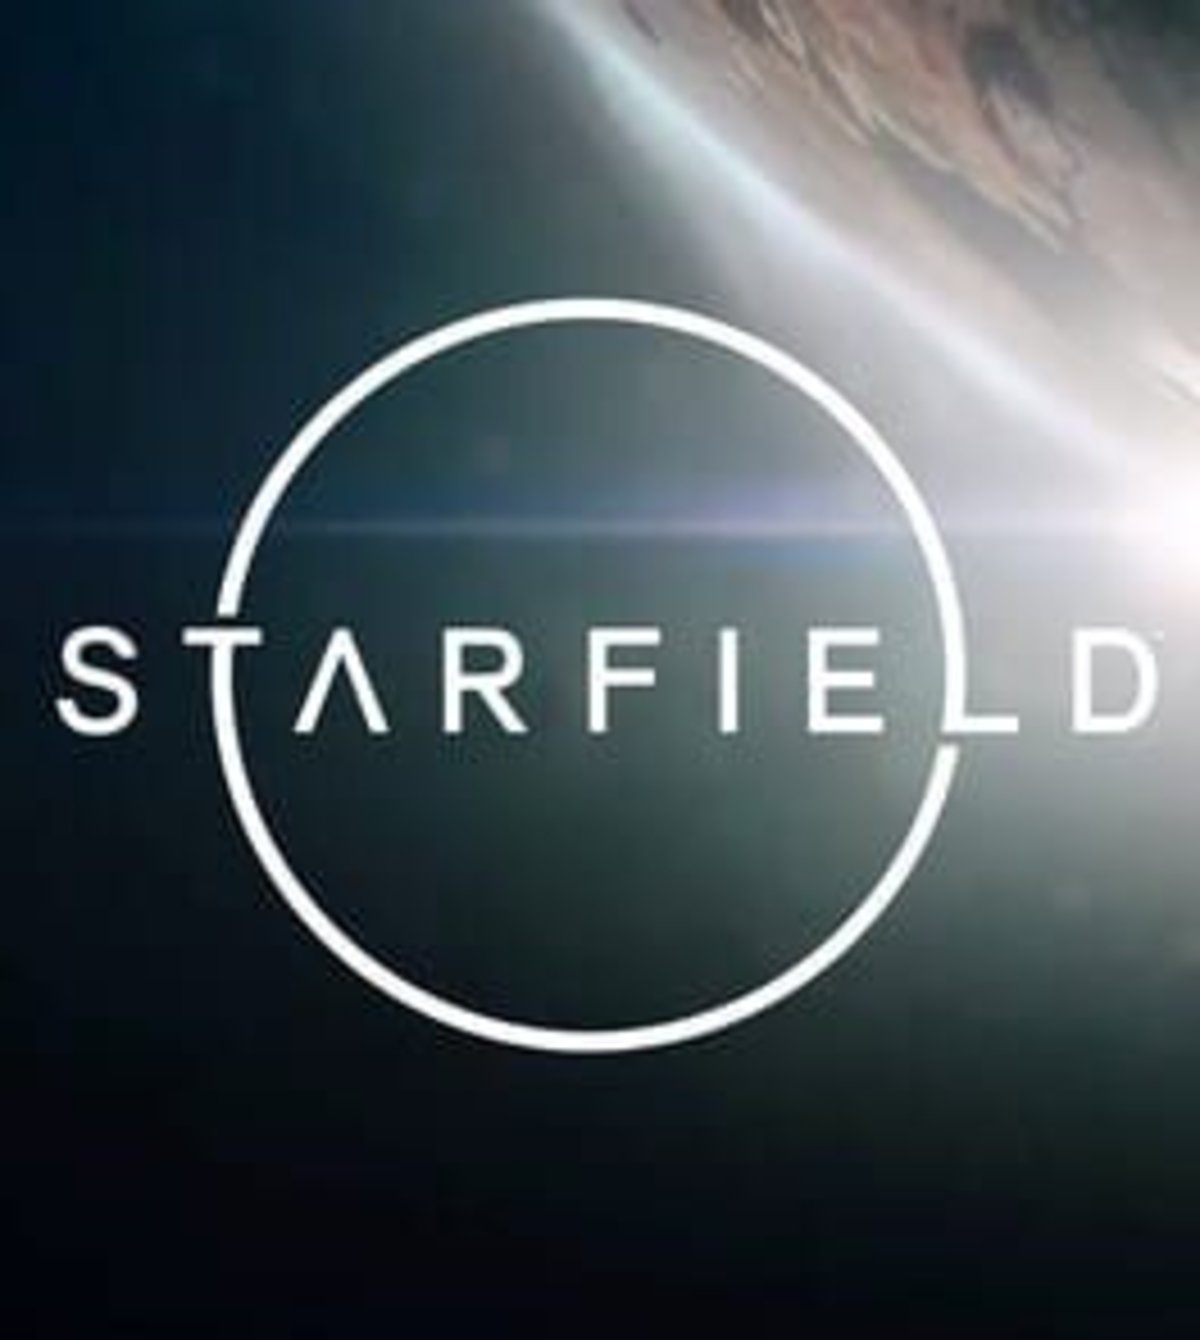 Starfield gives more details of the story, enemies and new images